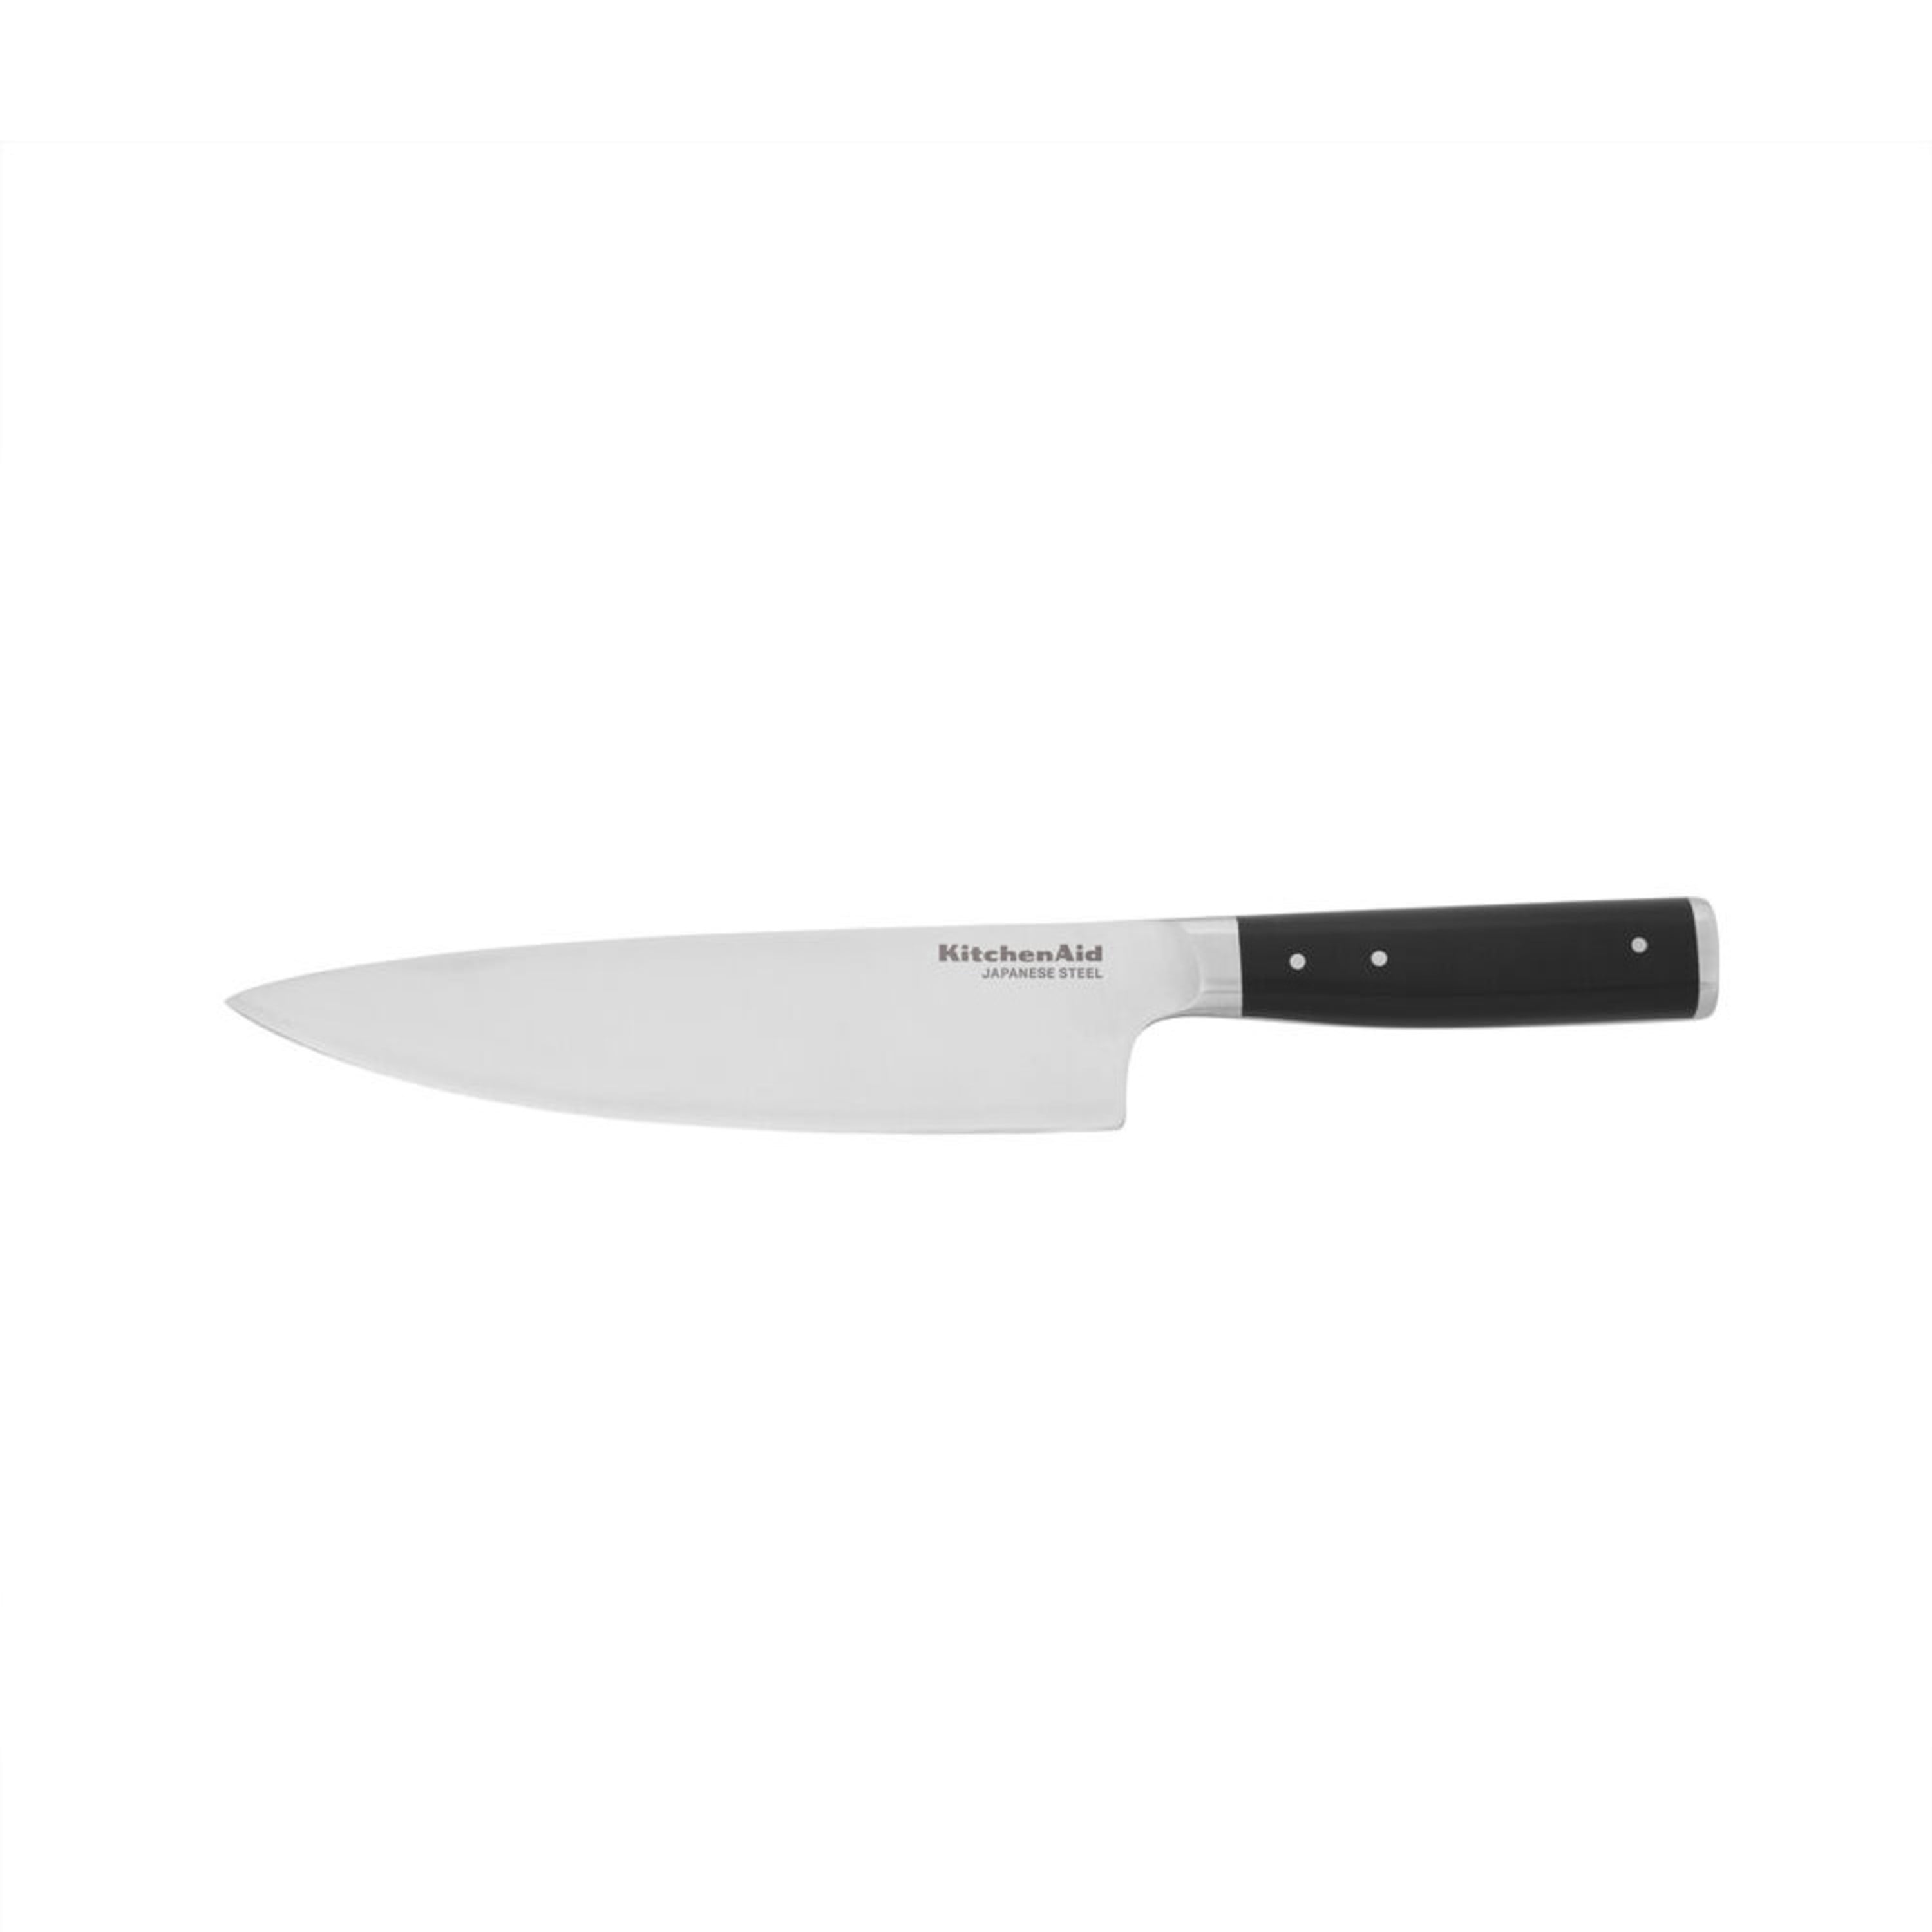 KitchenAid Gourmet 8-in. Chef Knife with Blade Cover